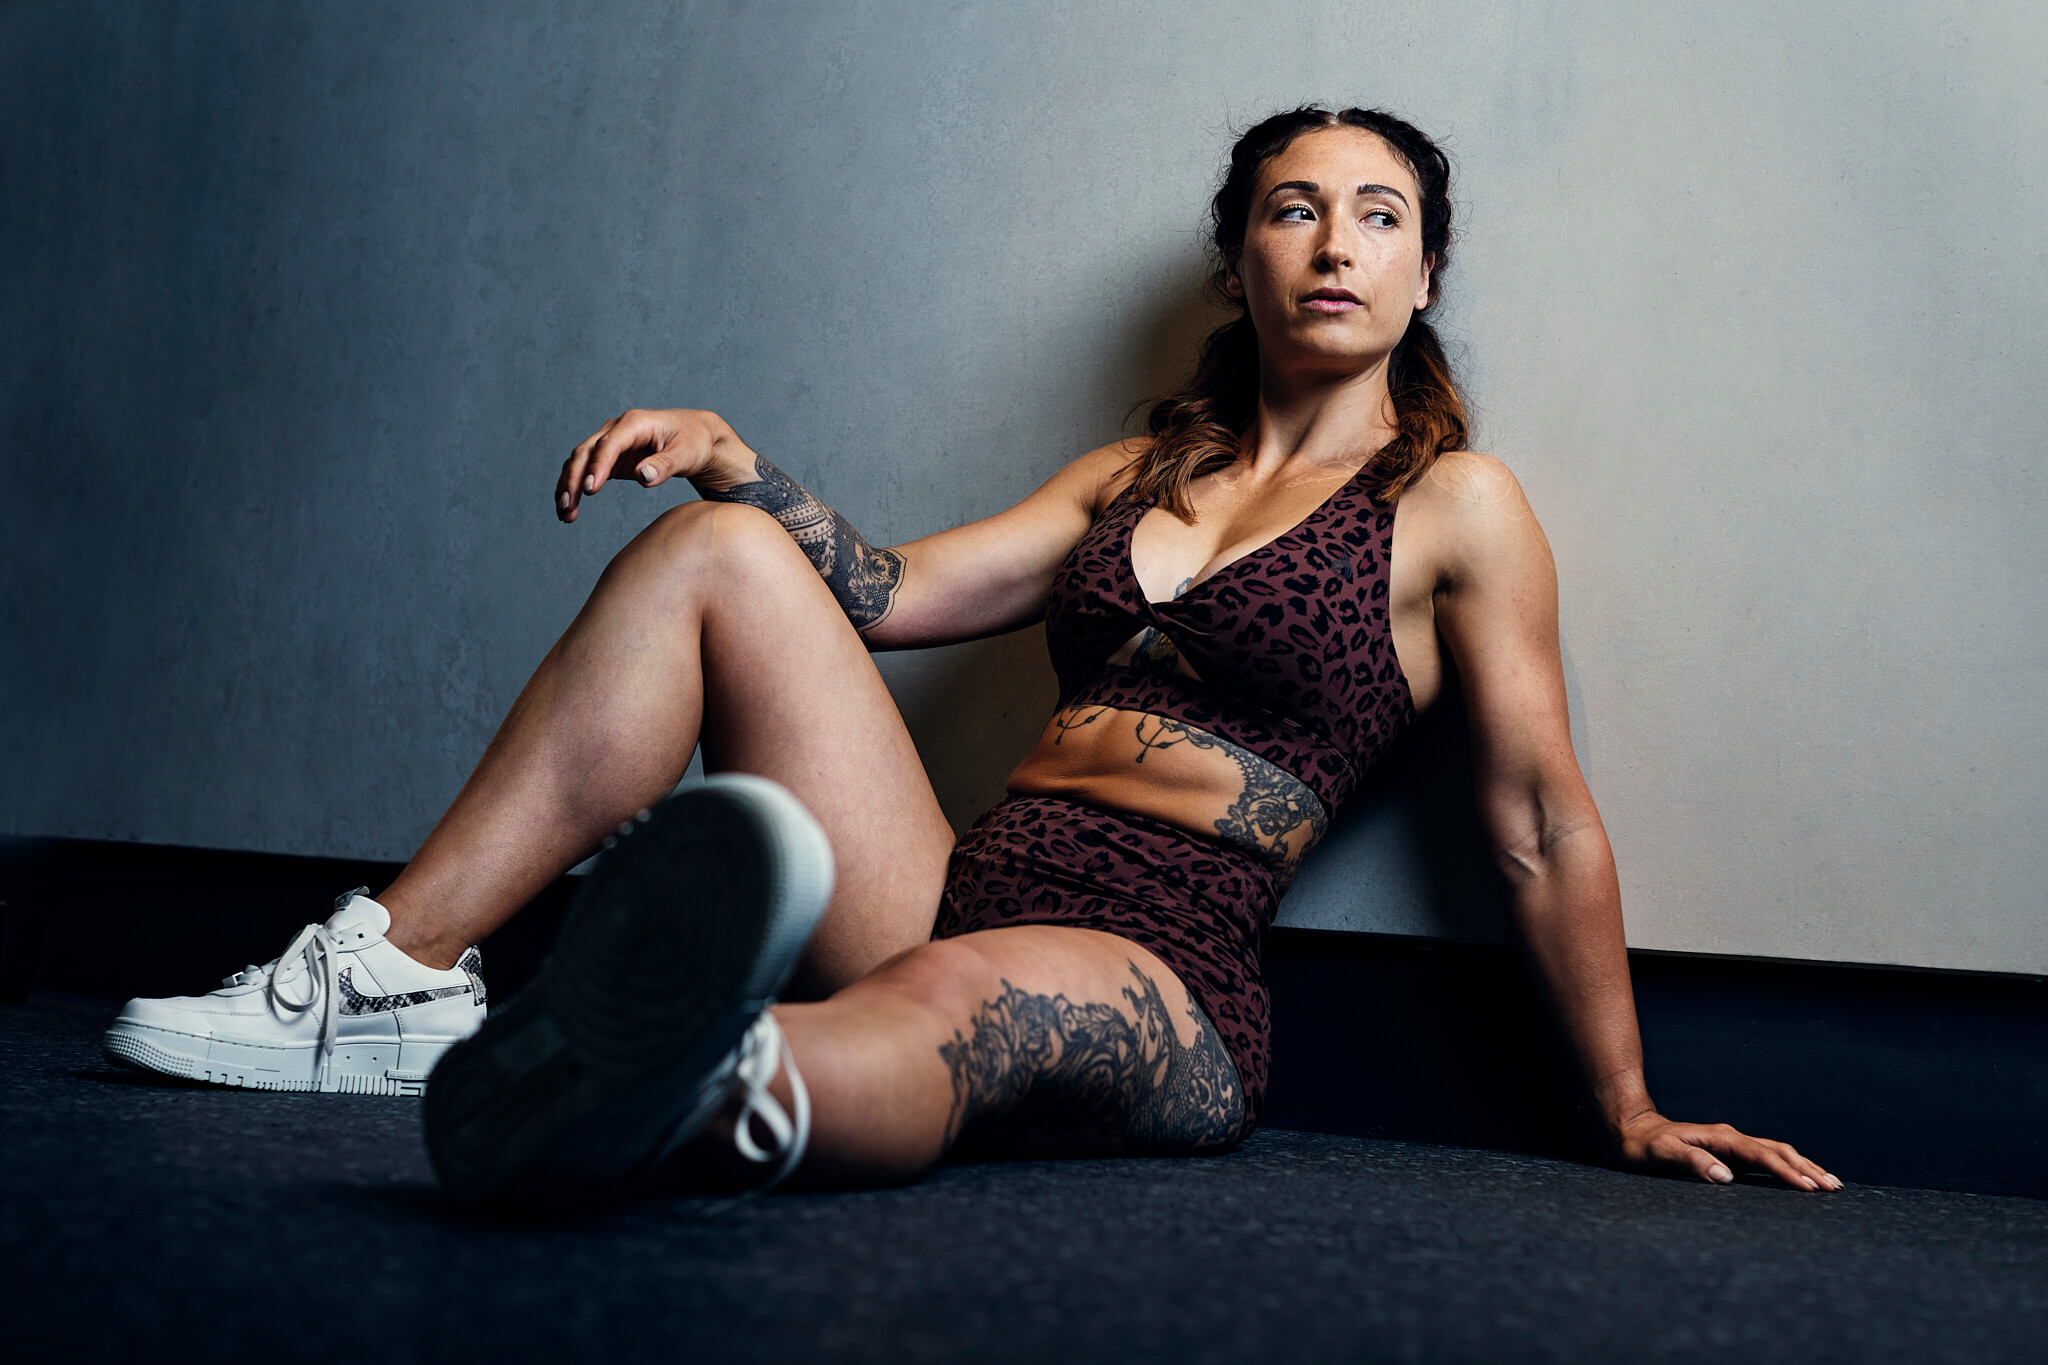 Portrait of an athlete taking a rest on the floor